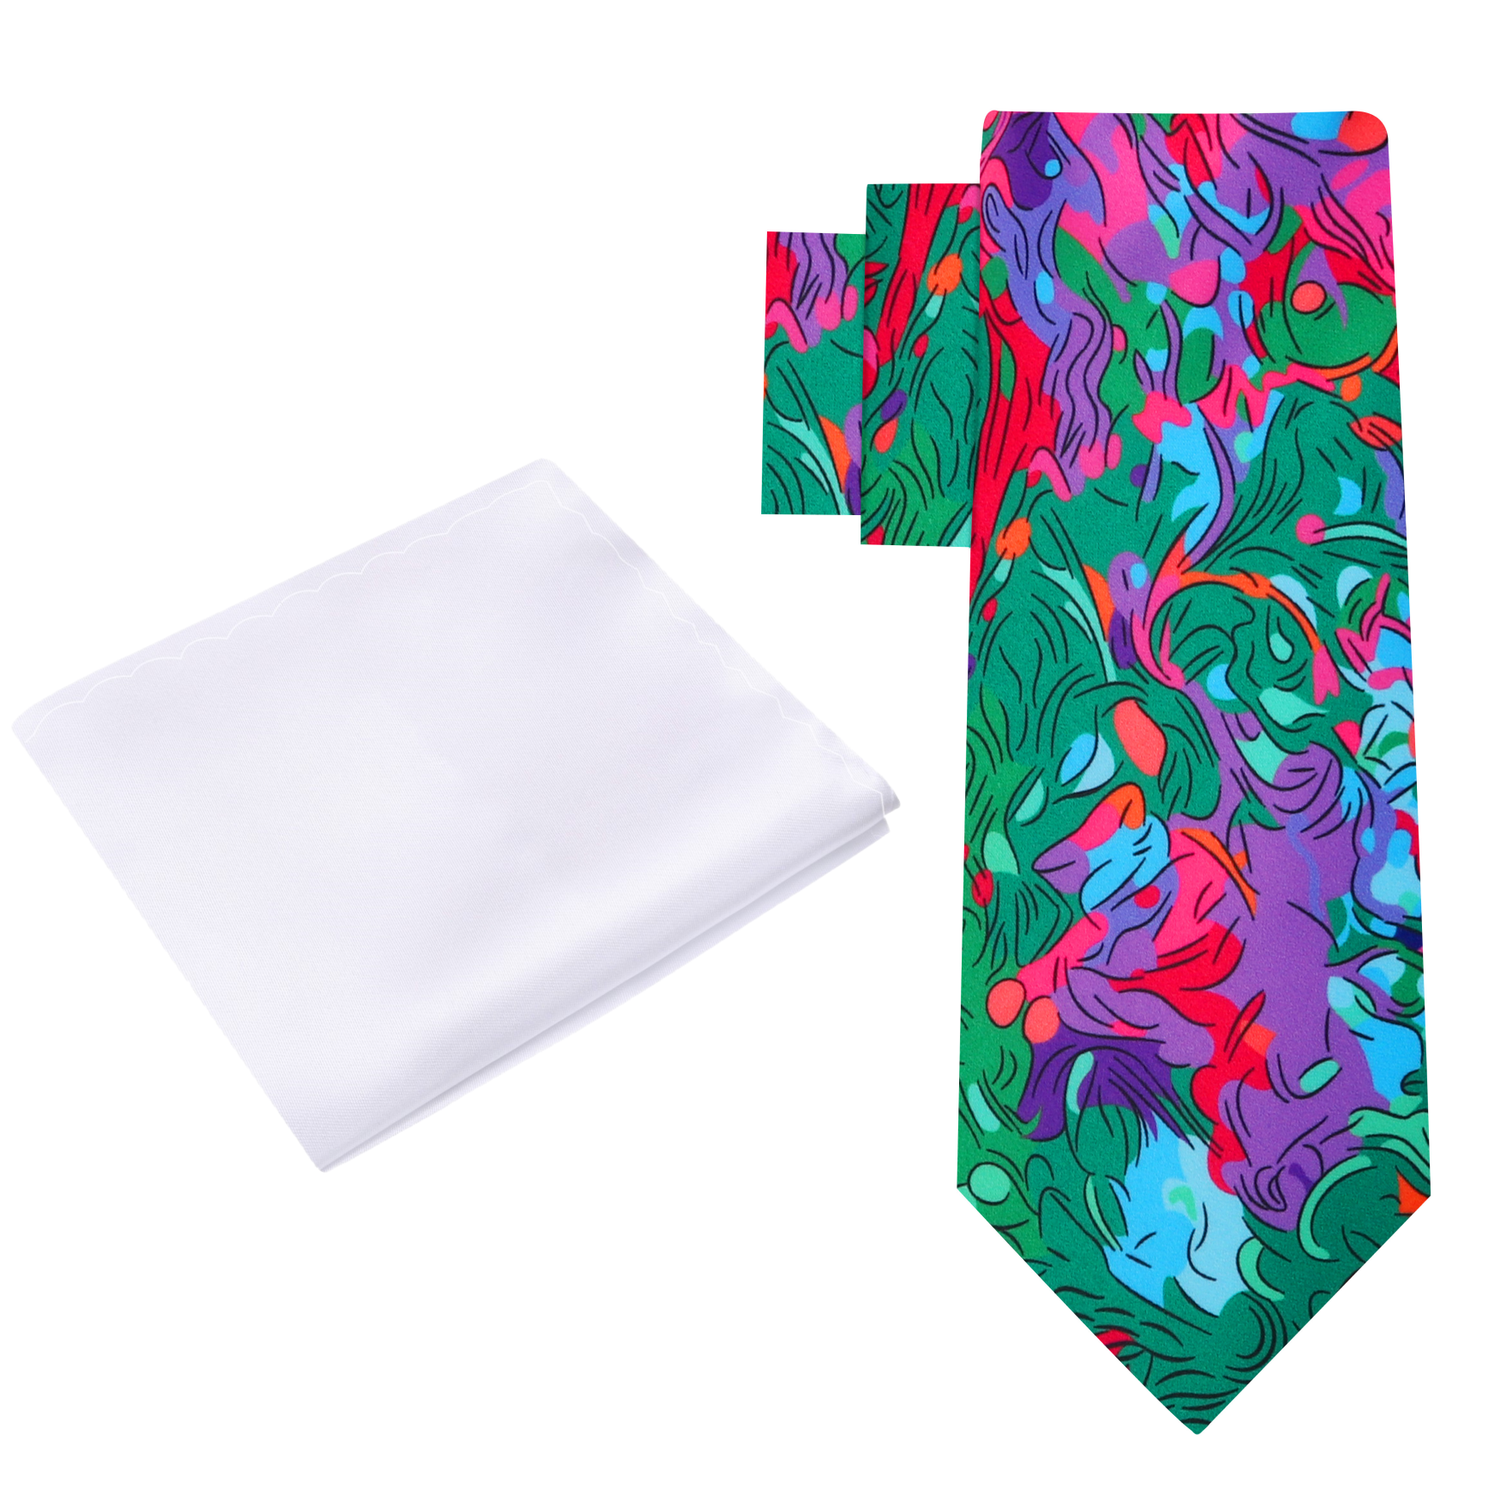 Alt View; Green, Blue, Purple Red Abstract Necktie and White Square